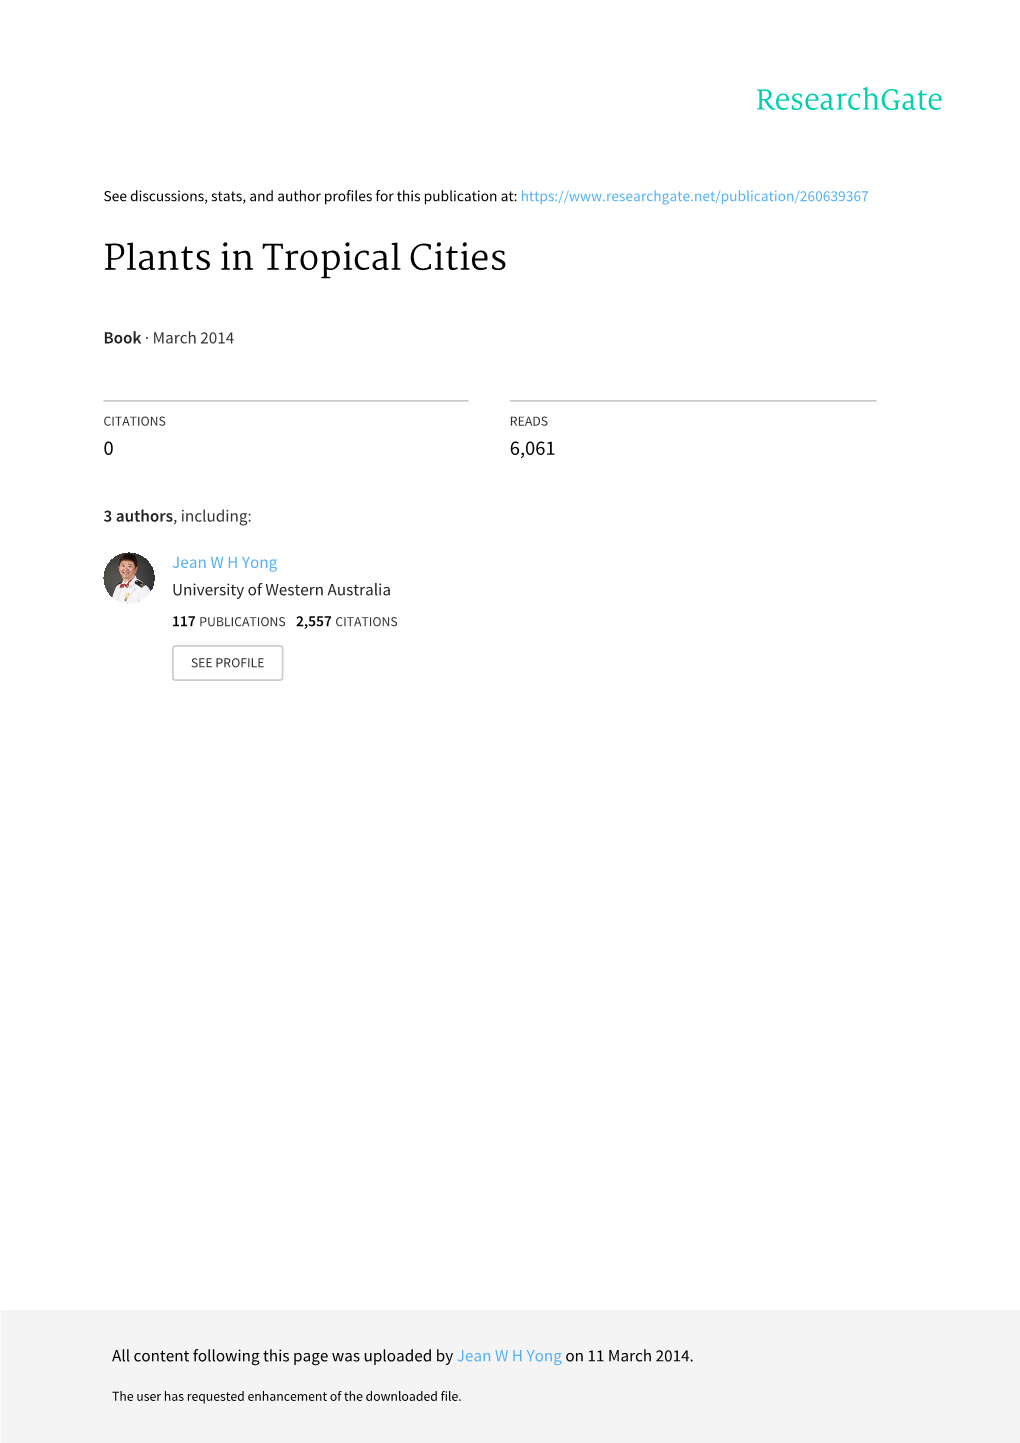 Plants in Tropical Cities